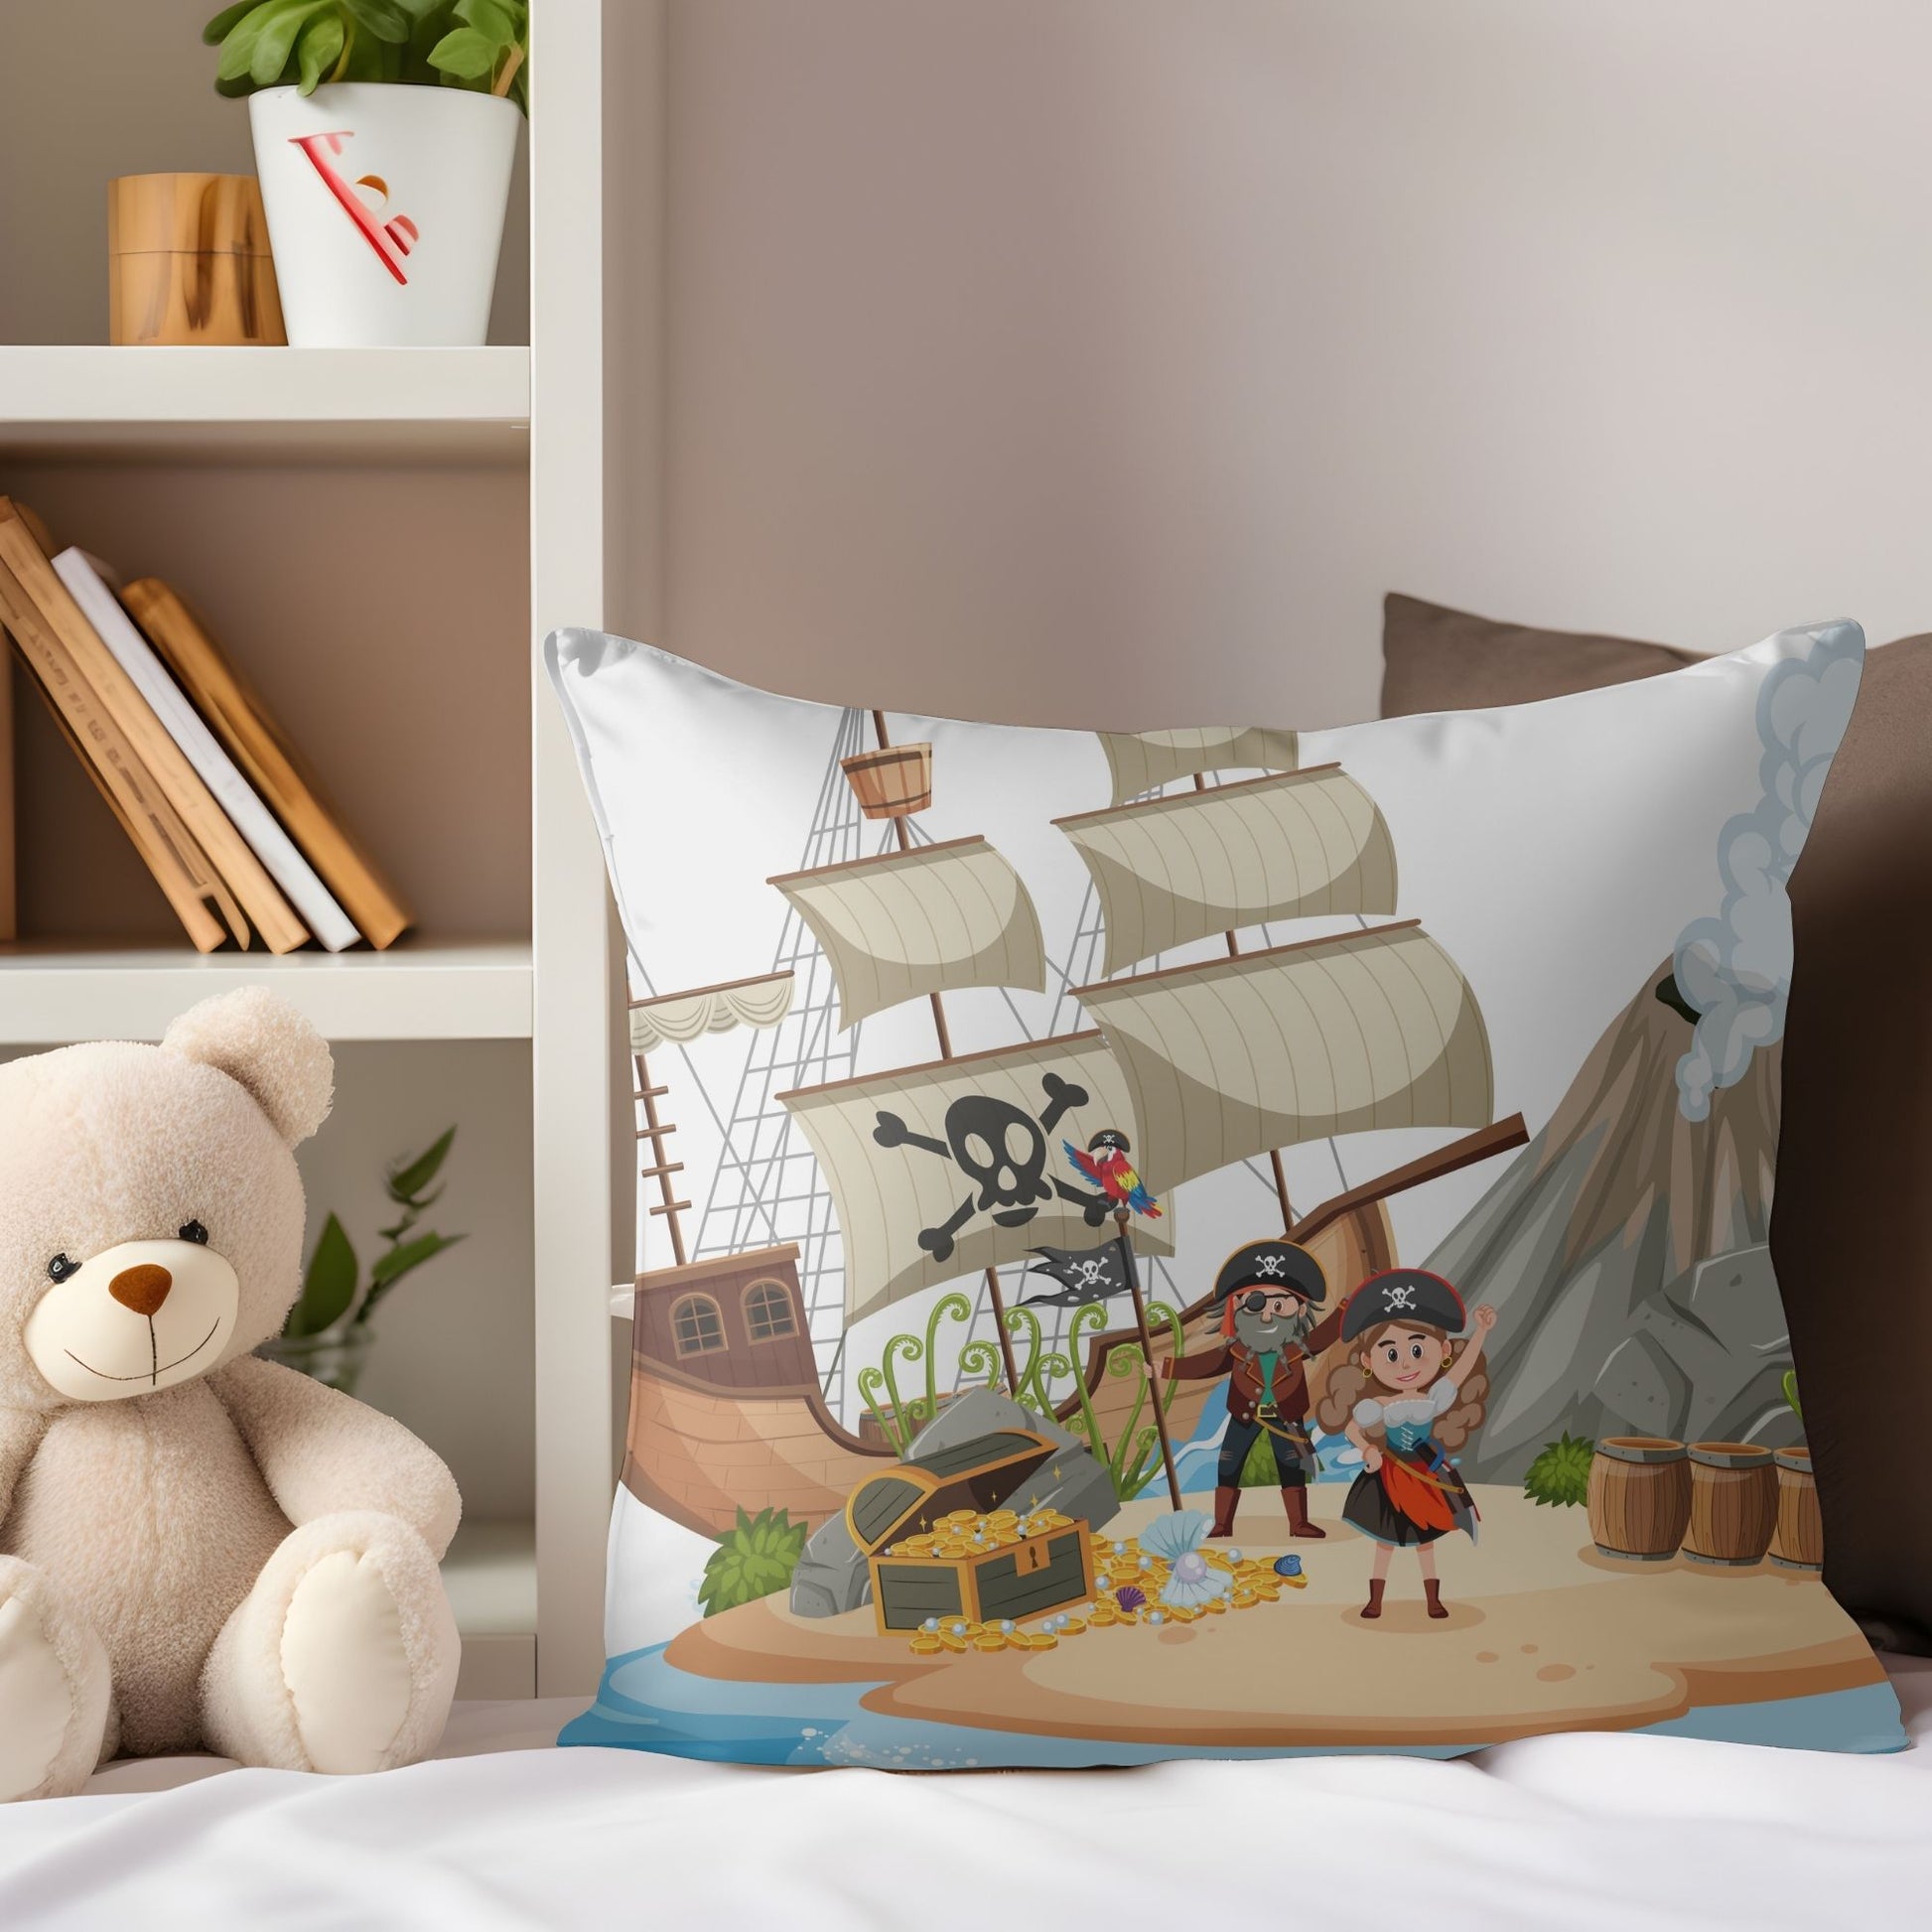 Pirate-themed kids pillow featuring a whimsical island scene.